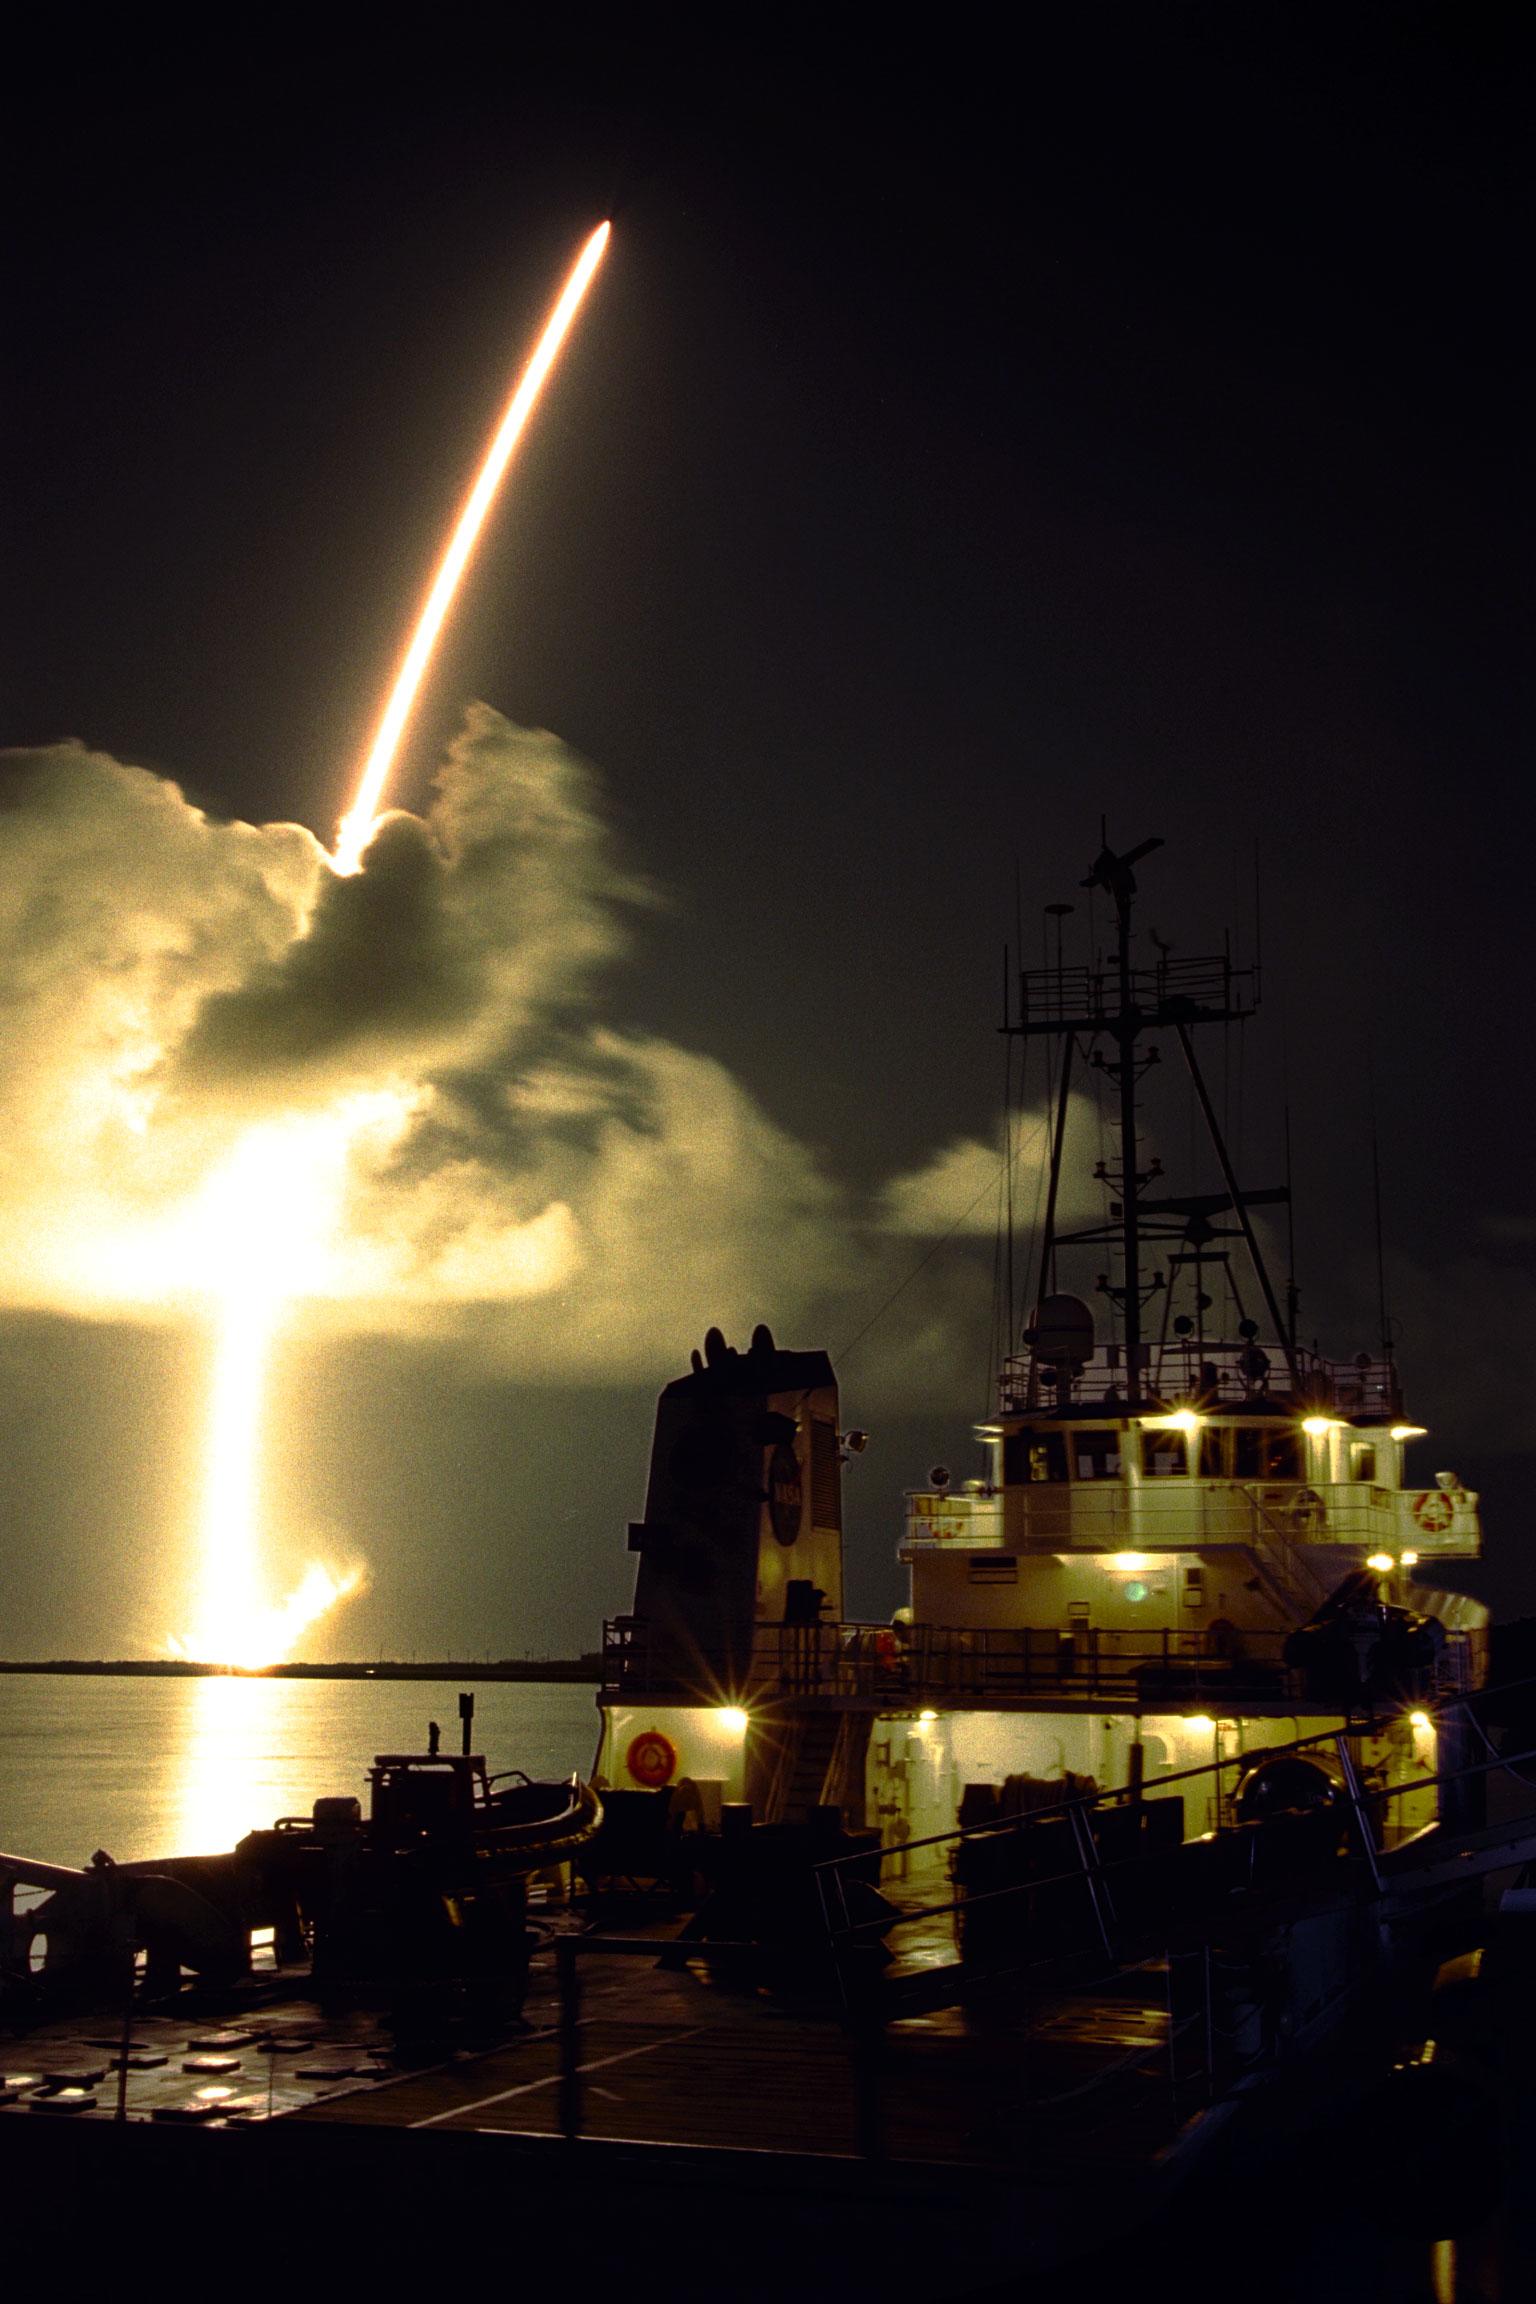 Color image of a rocket launch with a ship in the foreground.